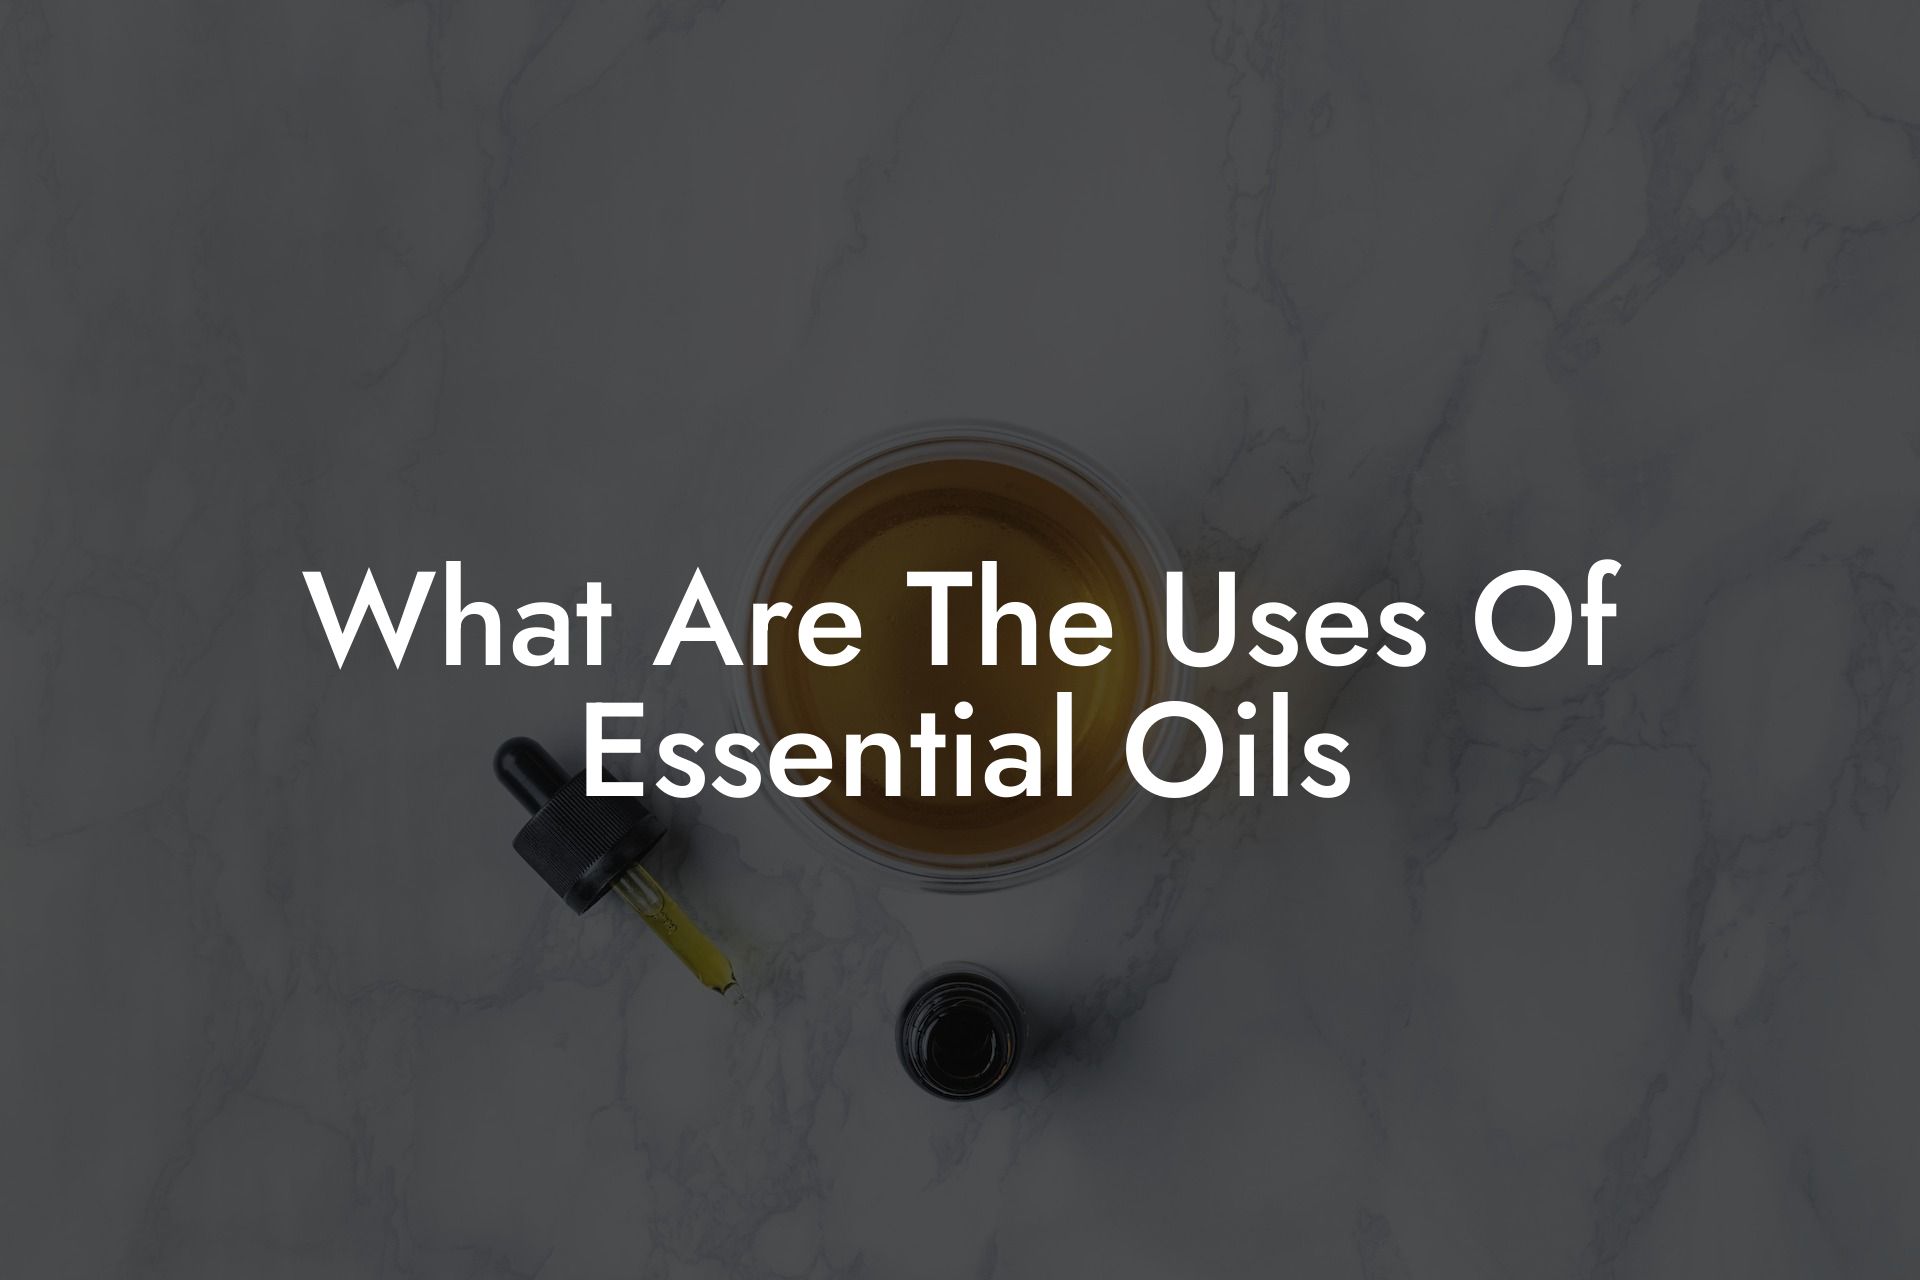 What Are The Uses Of Essential Oils